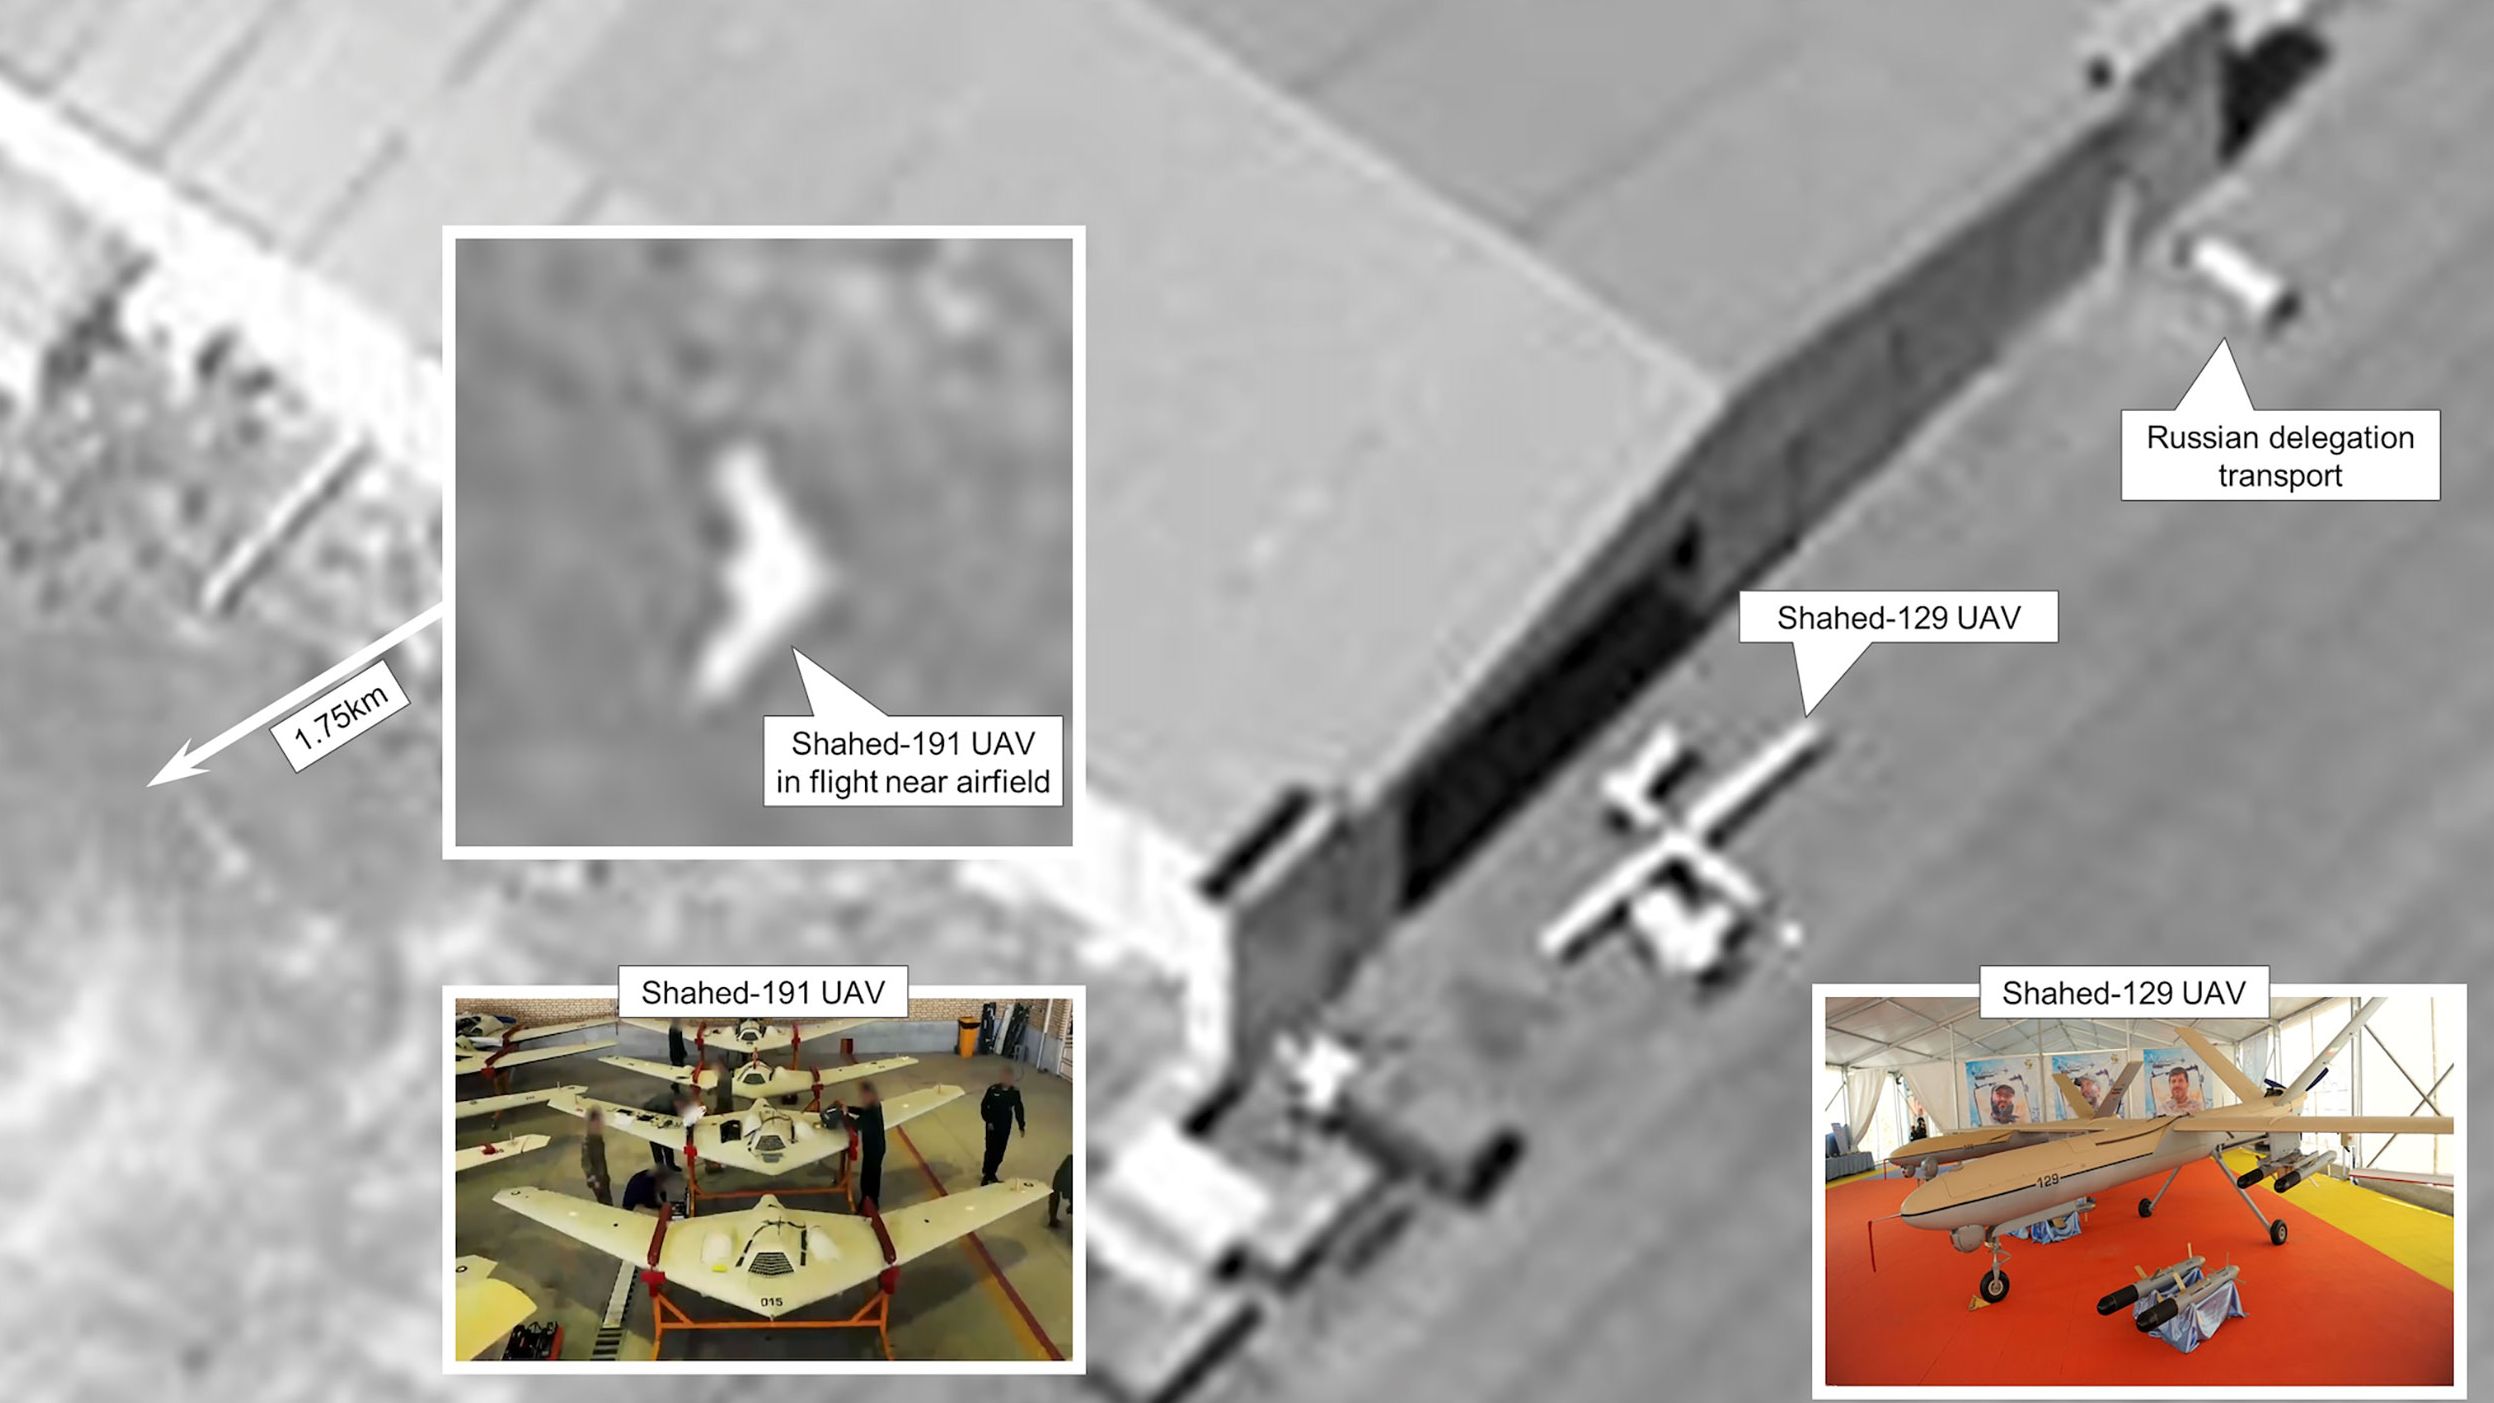 A Russian delegation has visited an airfield in central Iran at least twice since June to examine weapons-capable drones, according to National Security Adviser Jake Sullivan and satellite imagery obtained exclusively by CNN.